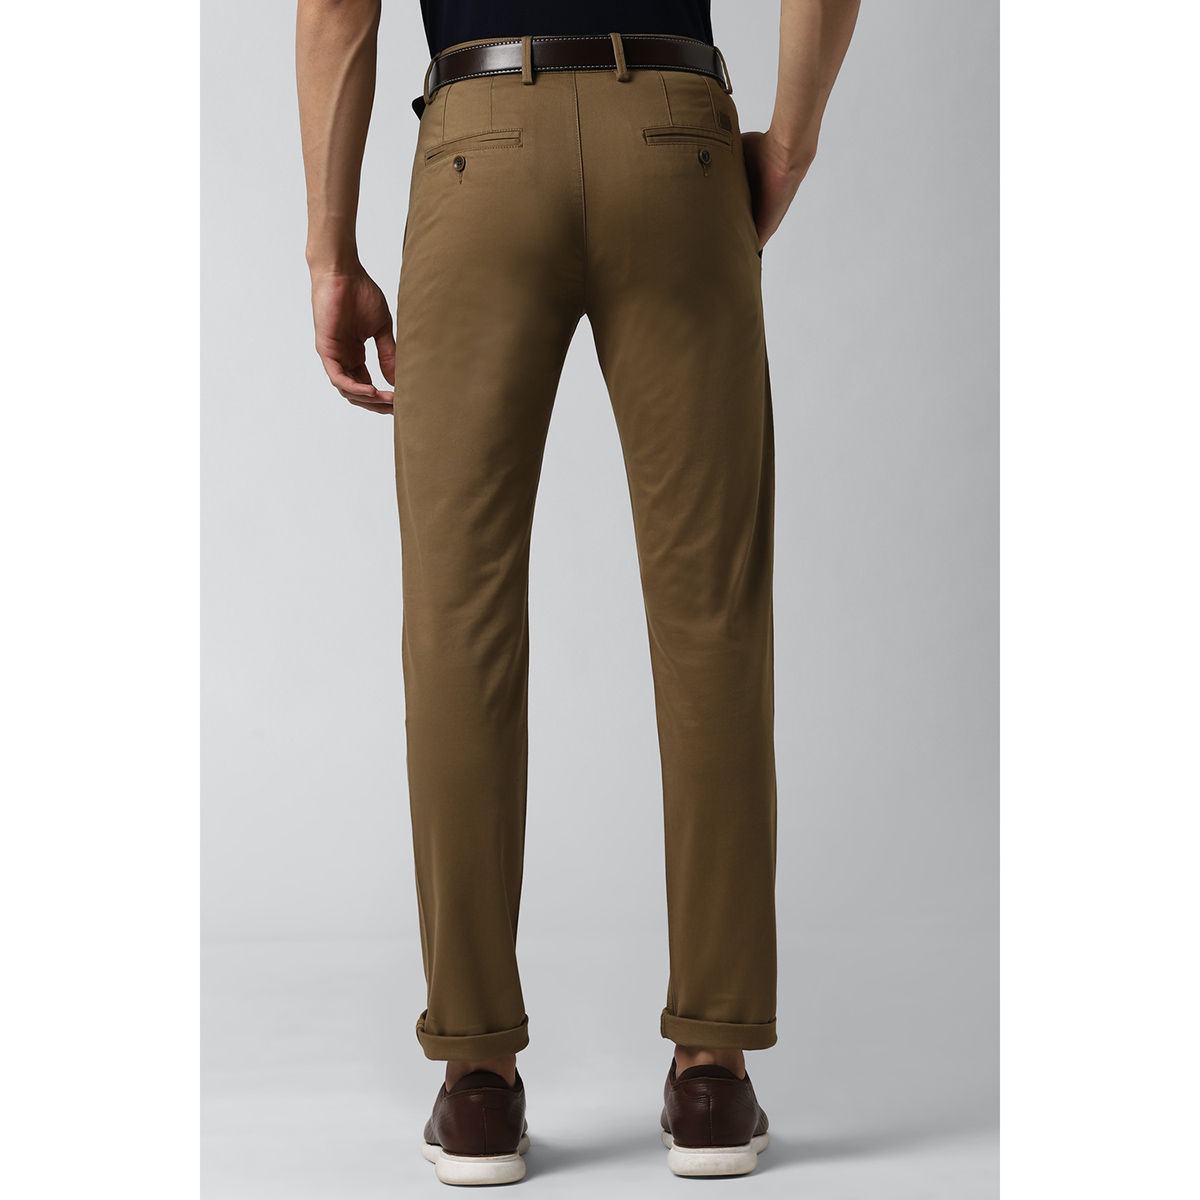 Buy Men Cream Solid Slim Fit Casual Trousers Online - 566726 | Peter England